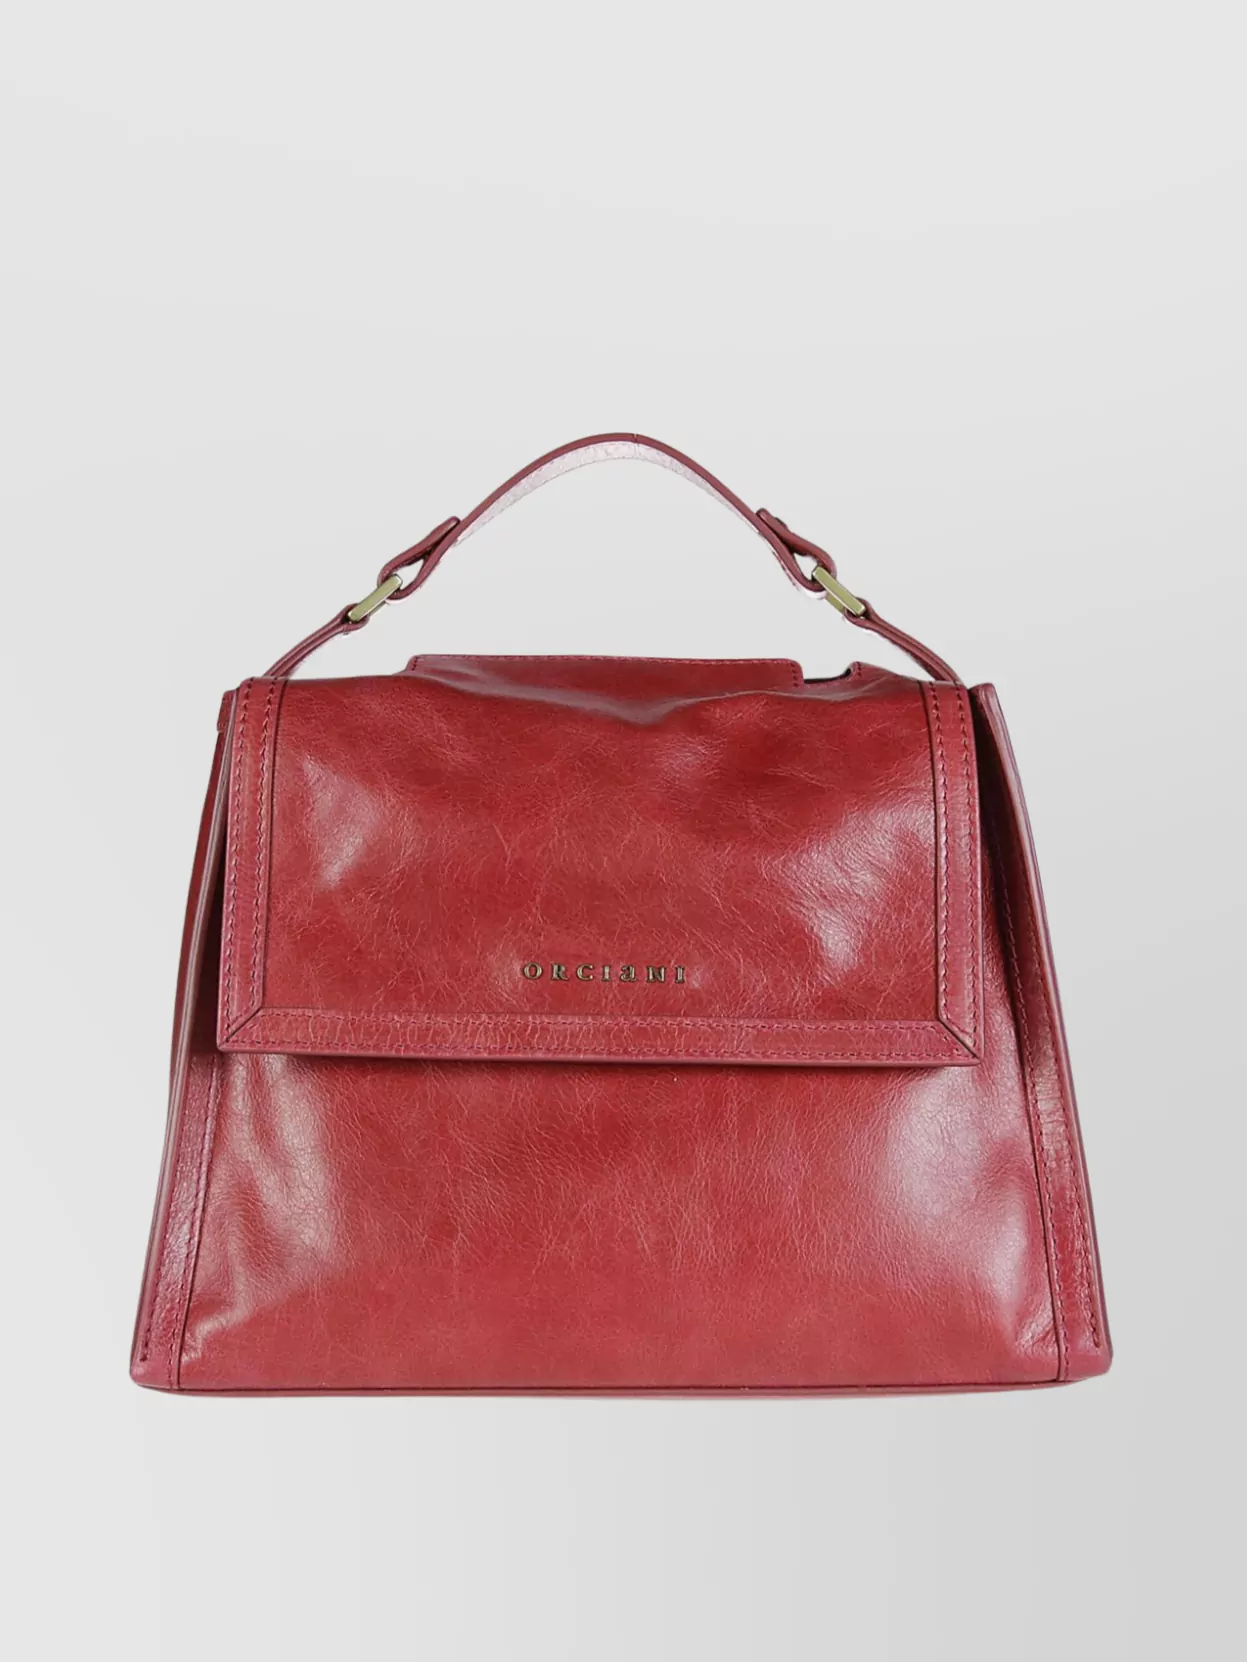 ORCIANI TEXTURED LEATHER TOTE WITH DETACHABLE STRAP